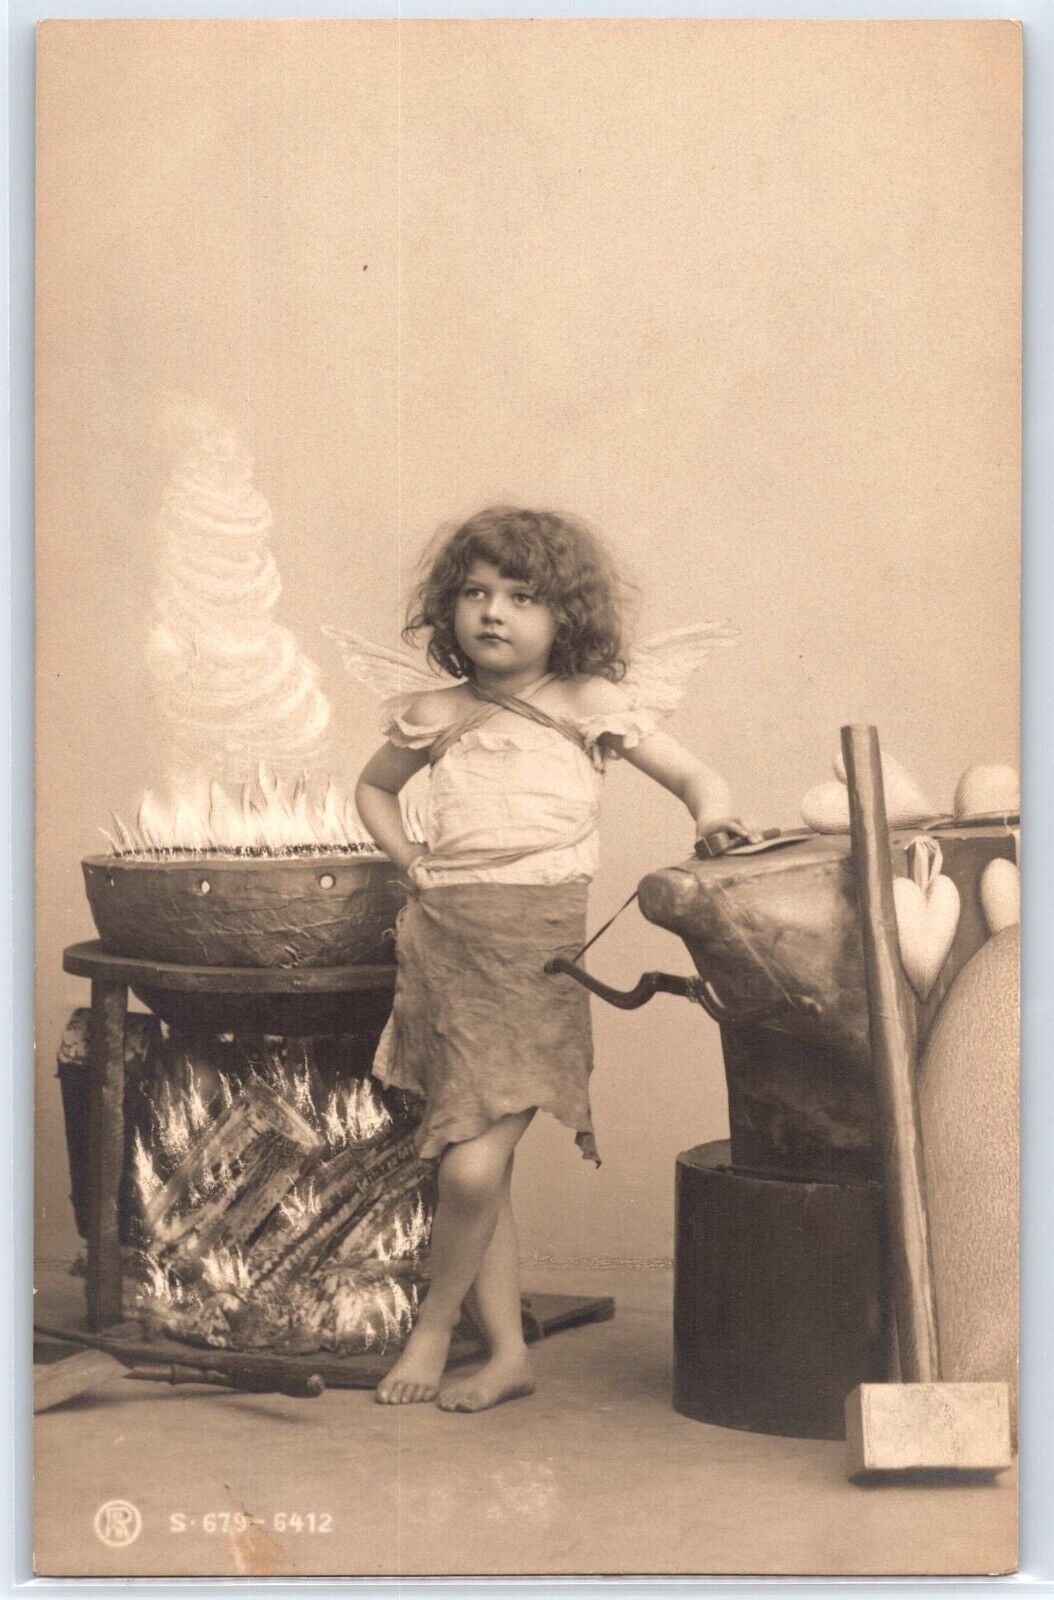 Antique 100 years Old RPPC Postcard - A Girl with a Hammer